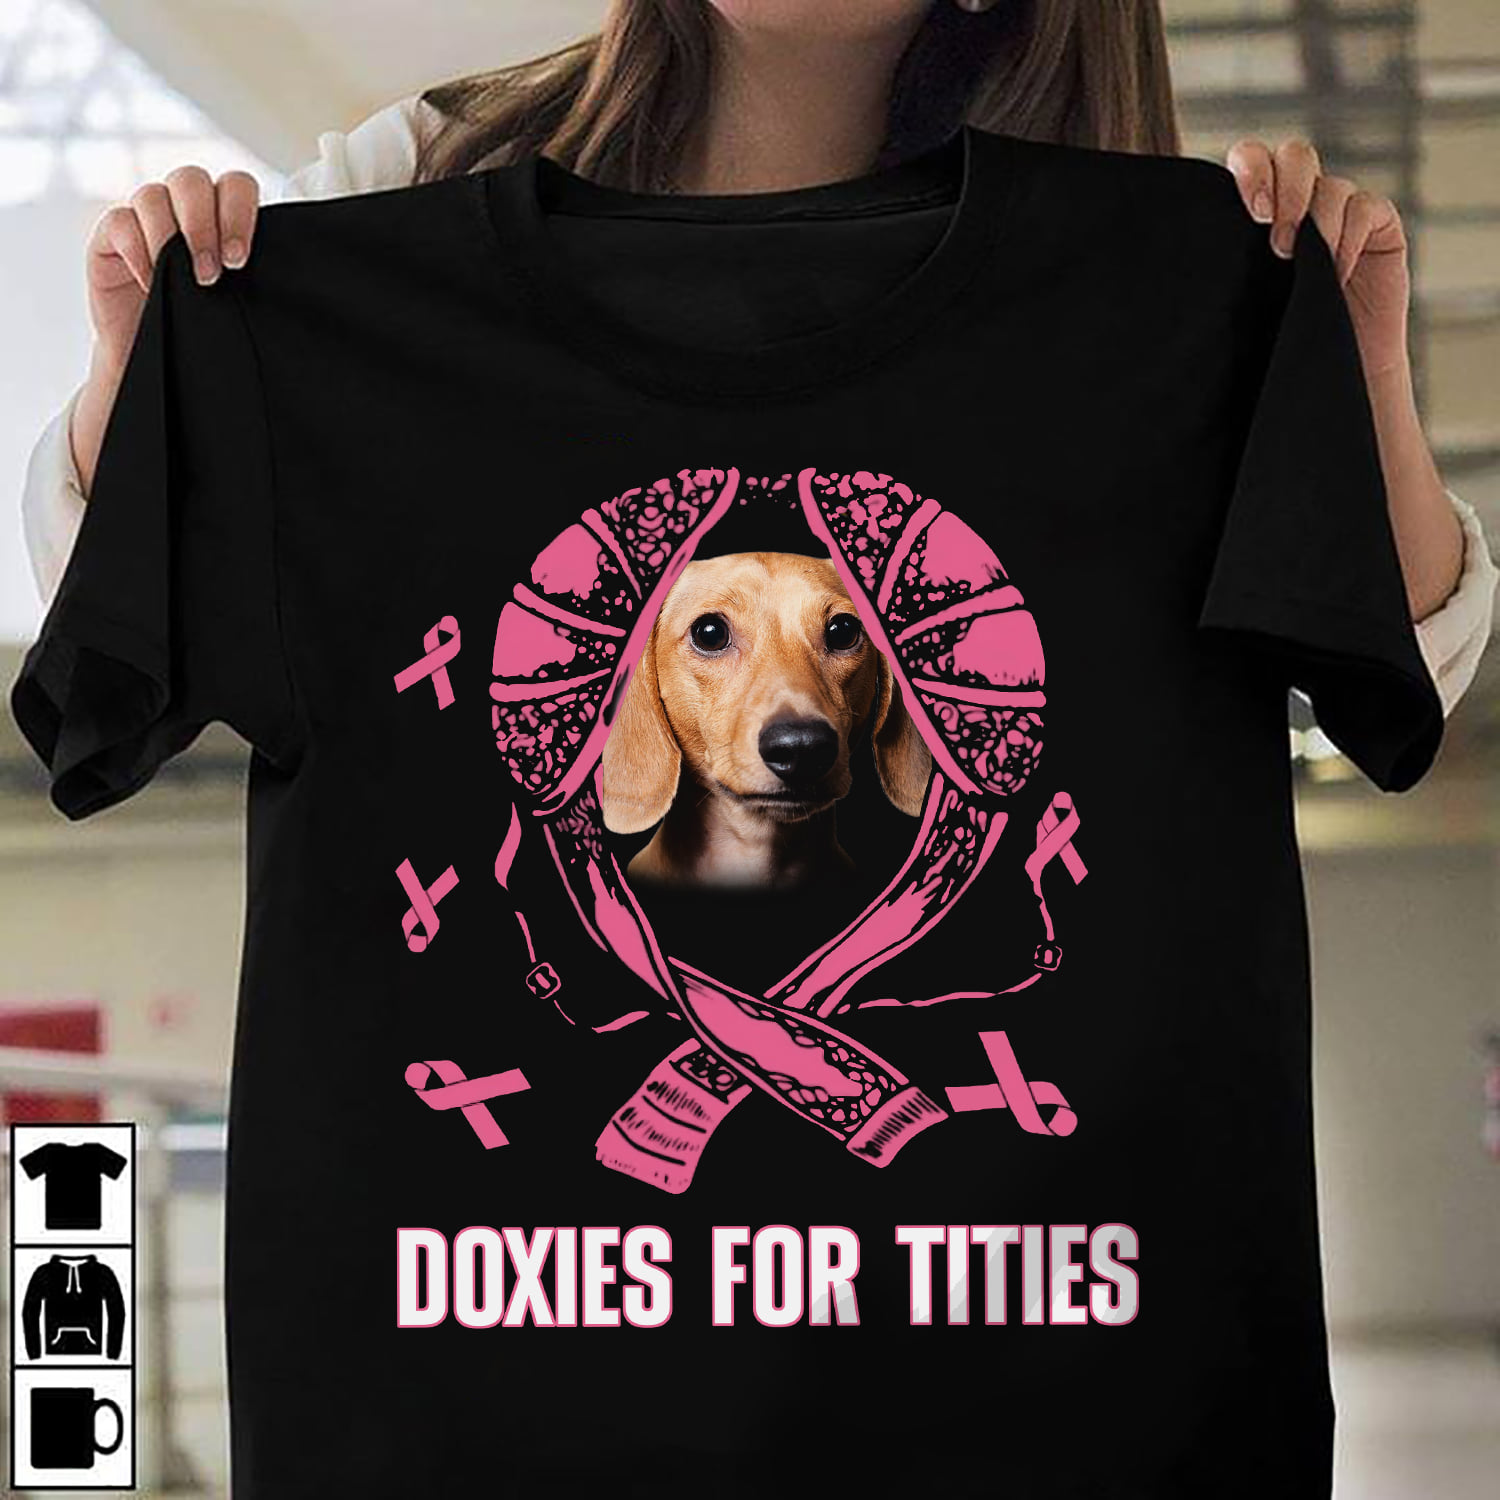 Breast Cancer Dachshund - Doxies for tities